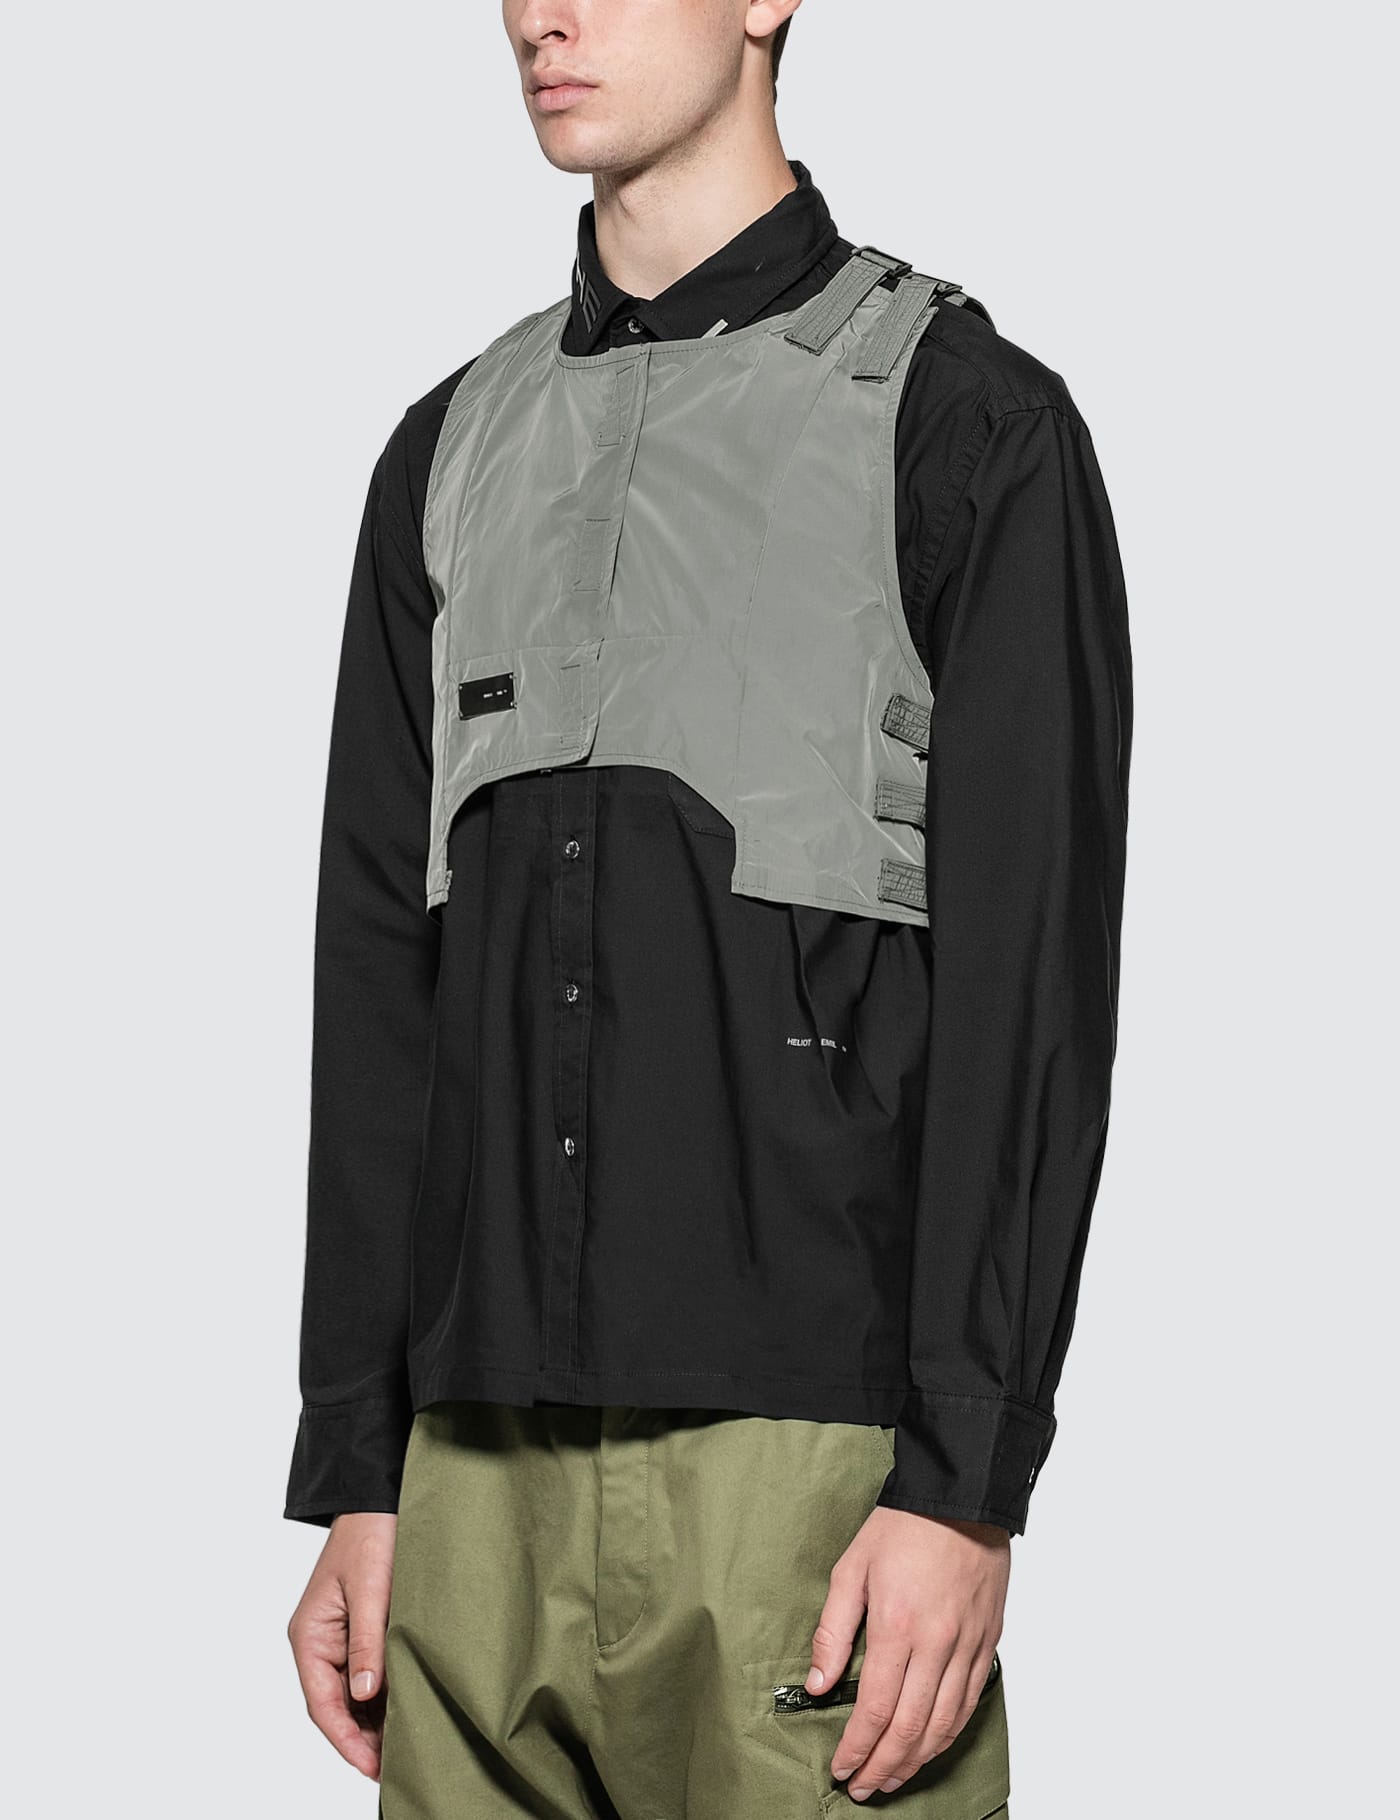 Heliot Emil - Integrated Vest Shirt | HBX - Globally Curated